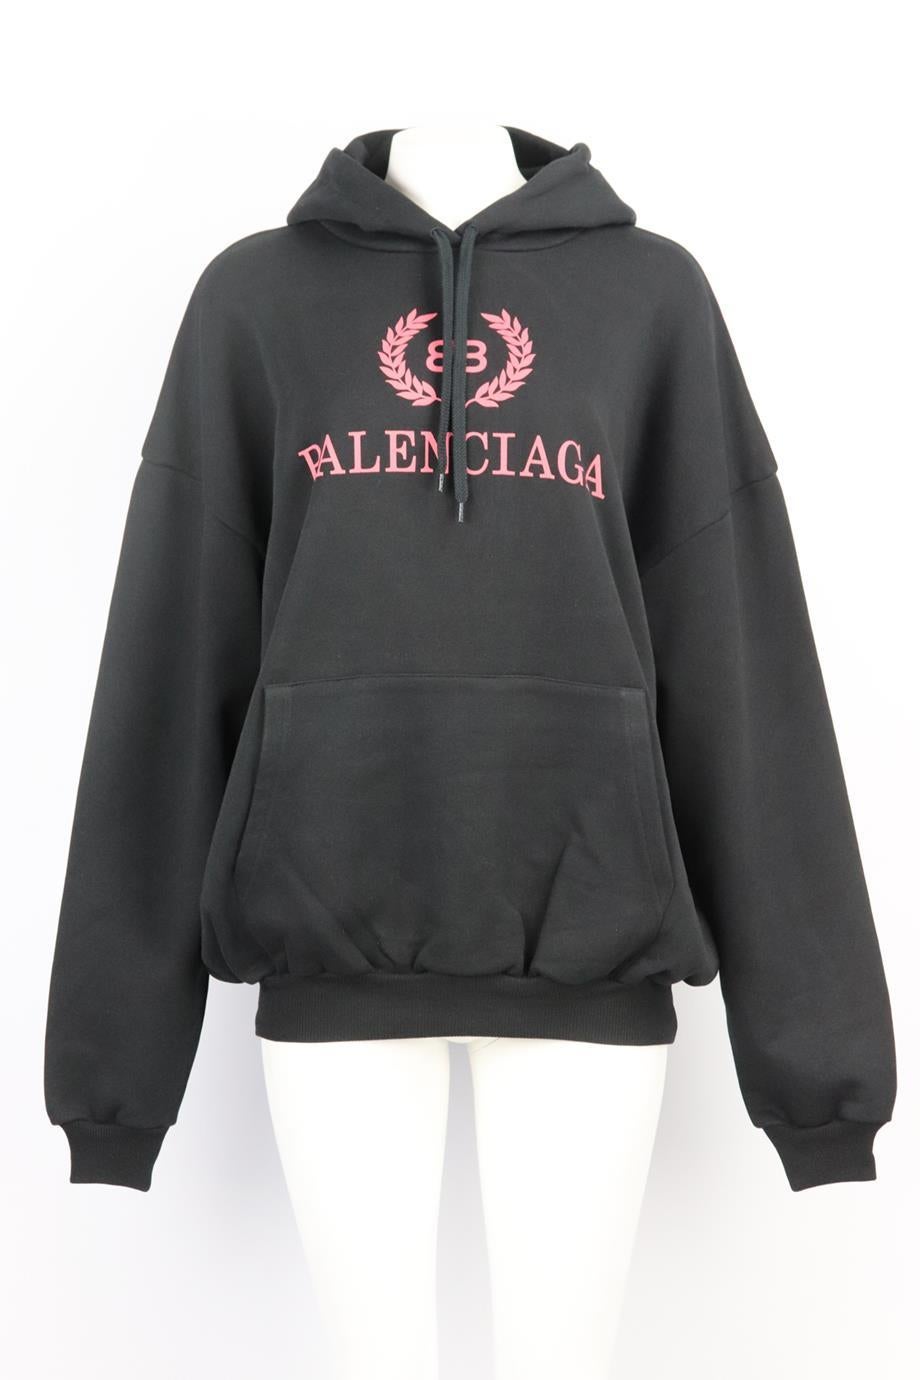 Balenciaga oversized printed cotton jersey hoodie. Black. Long sleeve, crewneck. Slips on. 100% Cotton. Size: Meduim (UK 10, US 6, FR 38, IT 42). Bust: 56 in. Waist: 54 in. Hips: 35 in. Length: 26 in. Very good condition - As new condition, no sign